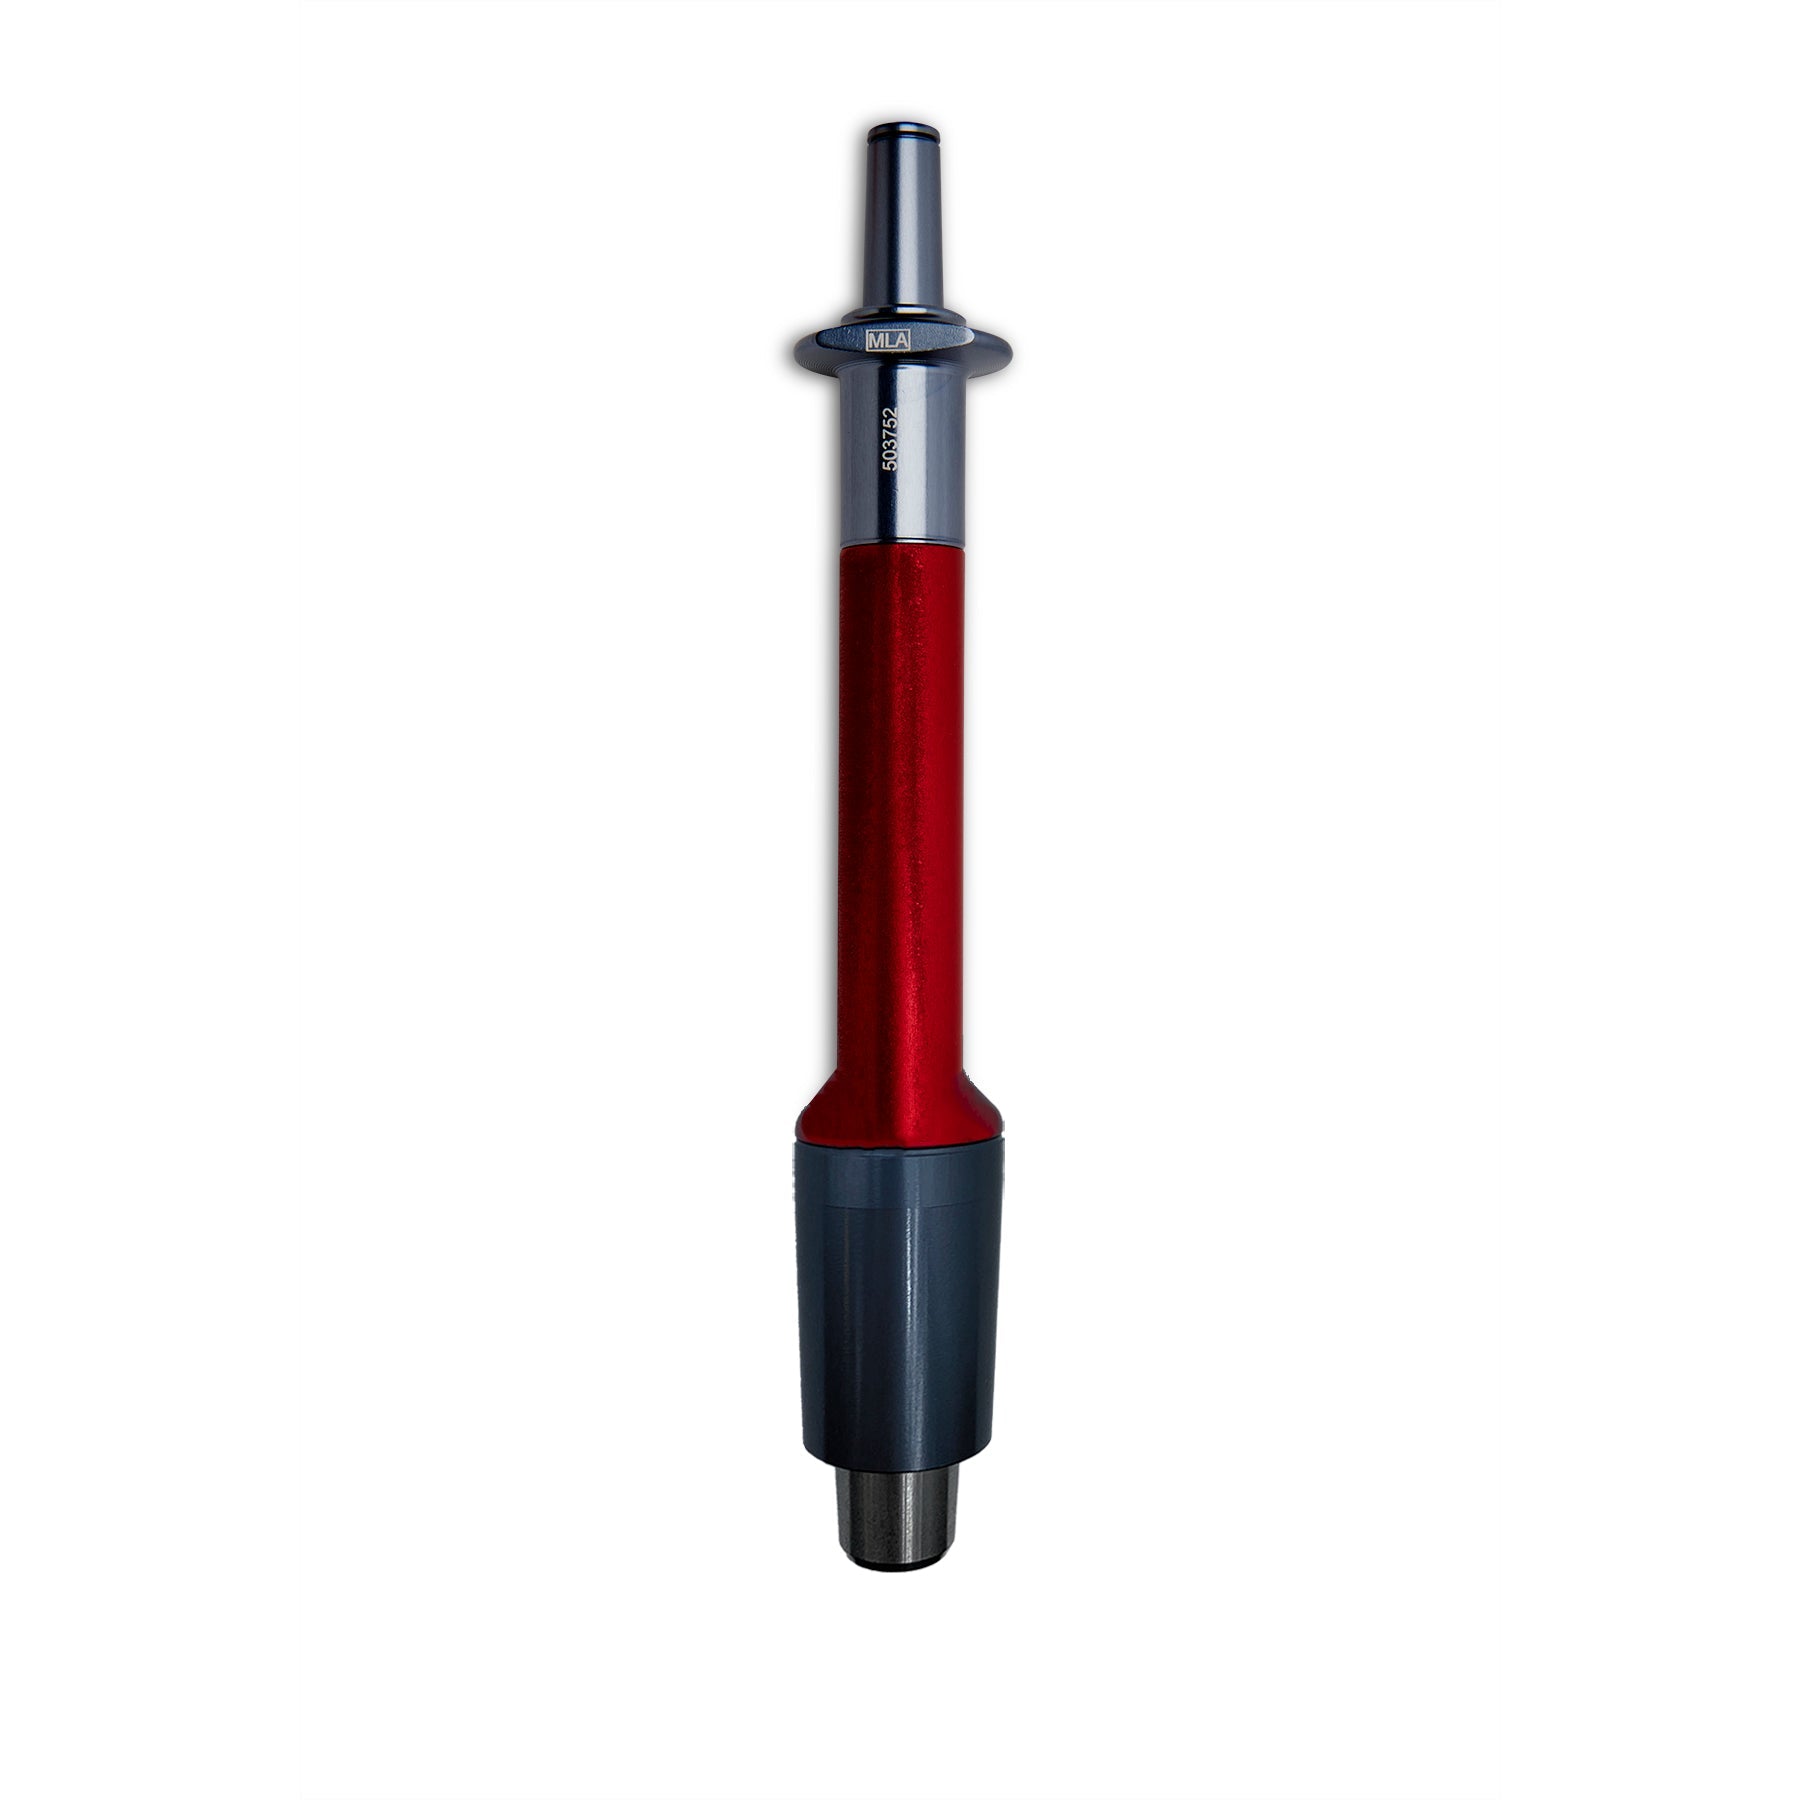 VistaLab 1076 Fixed Volume Pipette, 6.0 mL, Red